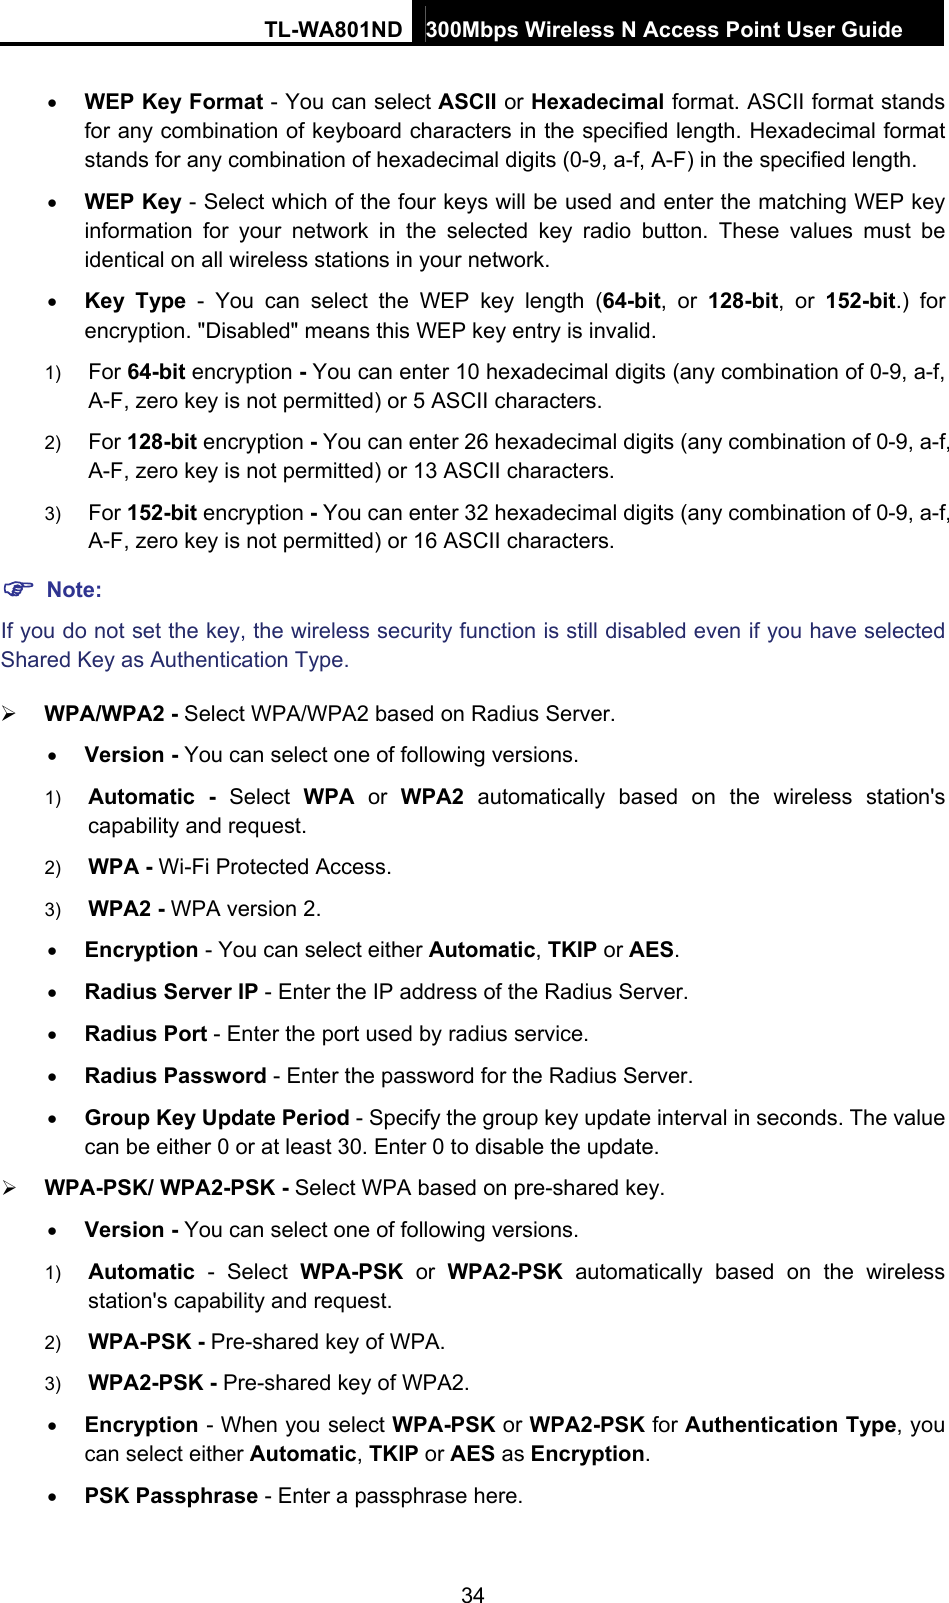 TL-WA801ND 300Mbps Wireless N Access Point User Guide  34 • WEP Key Format - You can select ASCII or Hexadecimal format. ASCII format stands for any combination of keyboard characters in the specified length. Hexadecimal format stands for any combination of hexadecimal digits (0-9, a-f, A-F) in the specified length. • WEP Key - Select which of the four keys will be used and enter the matching WEP key information for your network in the selected key radio button. These values must be identical on all wireless stations in your network.   • Key Type - You can select the WEP key length (64-bit, or 128-bit, or 152-bit.) for encryption. &quot;Disabled&quot; means this WEP key entry is invalid. 1)  For 64-bit encryption - You can enter 10 hexadecimal digits (any combination of 0-9, a-f, A-F, zero key is not permitted) or 5 ASCII characters.   2)  For 128-bit encryption - You can enter 26 hexadecimal digits (any combination of 0-9, a-f, A-F, zero key is not permitted) or 13 ASCII characters.   3)  For 152-bit encryption - You can enter 32 hexadecimal digits (any combination of 0-9, a-f, A-F, zero key is not permitted) or 16 ASCII characters.   ) Note: If you do not set the key, the wireless security function is still disabled even if you have selected Shared Key as Authentication Type.   ¾ WPA/WPA2 - Select WPA/WPA2 based on Radius Server. • Version - You can select one of following versions. 1)  Automatic - Select WPA or WPA2 automatically based on the wireless station&apos;s capability and request.   2)  WPA - Wi-Fi Protected Access.   3)  WPA2 - WPA version 2.   • Encryption - You can select either Automatic, TKIP or AES. • Radius Server IP - Enter the IP address of the Radius Server. • Radius Port - Enter the port used by radius service. • Radius Password - Enter the password for the Radius Server. • Group Key Update Period - Specify the group key update interval in seconds. The value can be either 0 or at least 30. Enter 0 to disable the update. ¾ WPA-PSK/ WPA2-PSK - Select WPA based on pre-shared key. • Version - You can select one of following versions. 1)  Automatic - Select WPA-PSK or WPA2-PSK automatically based on the wireless station&apos;s capability and request.   2)  WPA-PSK - Pre-shared key of WPA.   3)  WPA2-PSK - Pre-shared key of WPA2.   • Encryption - When you select WPA-PSK or WPA2-PSK for Authentication Type, you can select either Automatic, TKIP or AES as Encryption. • PSK Passphrase - Enter a passphrase here. 